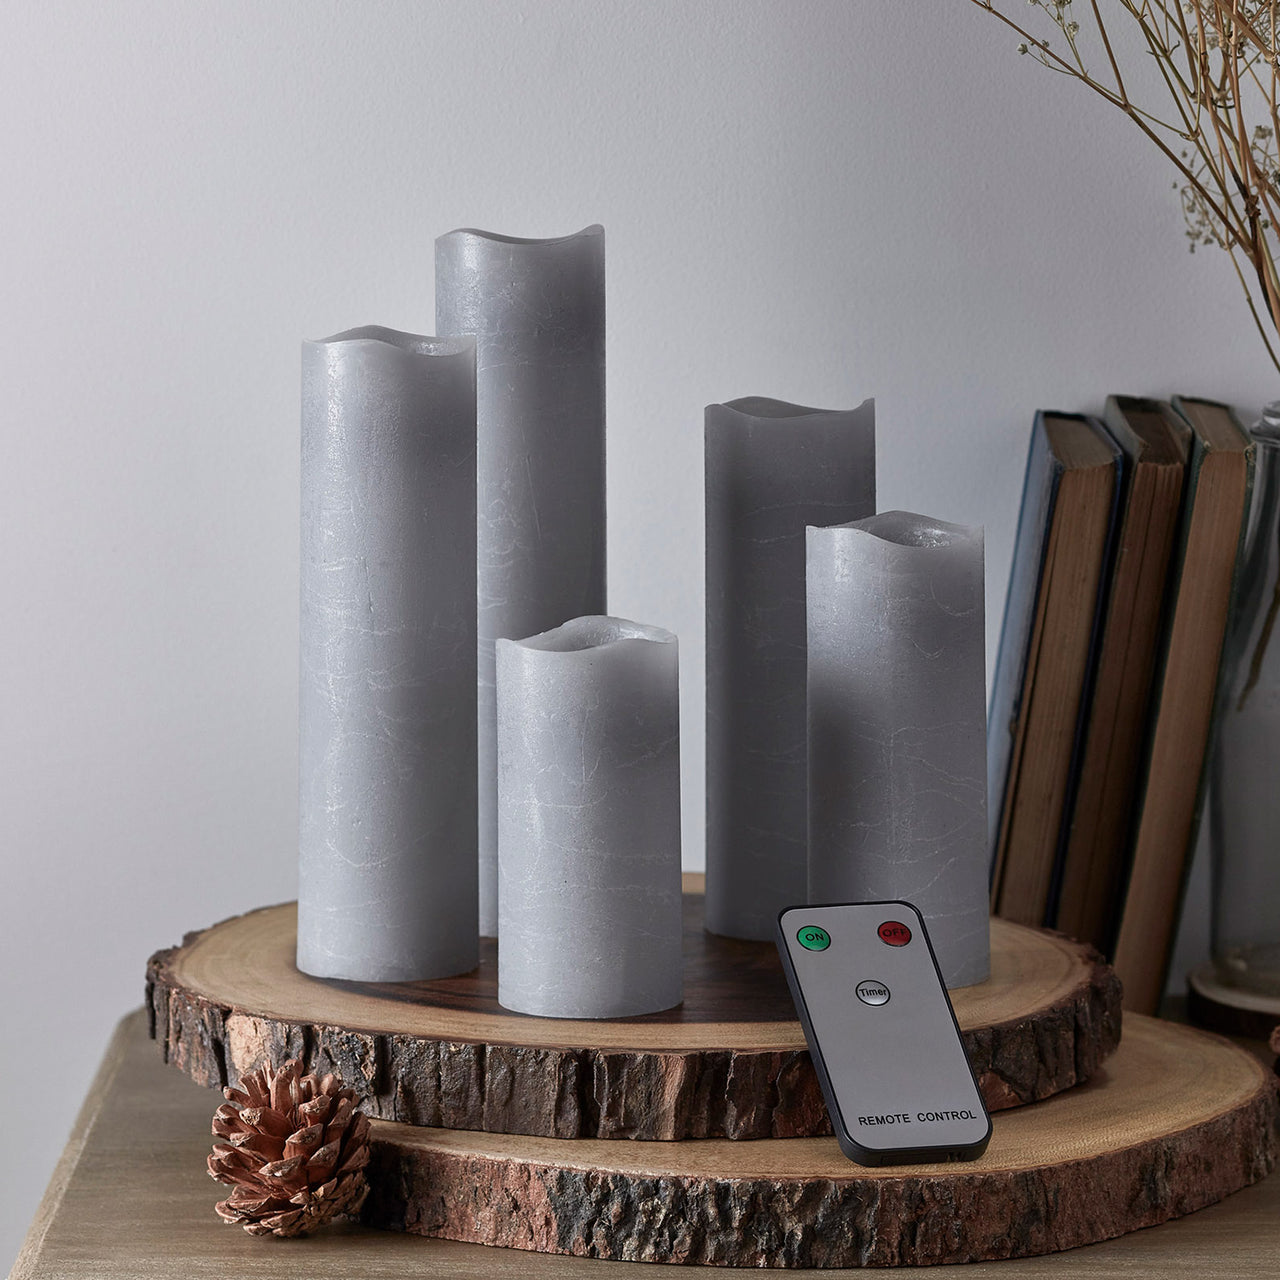 Set of 5 Grey Slim LED Pillar Candles with Remote Control